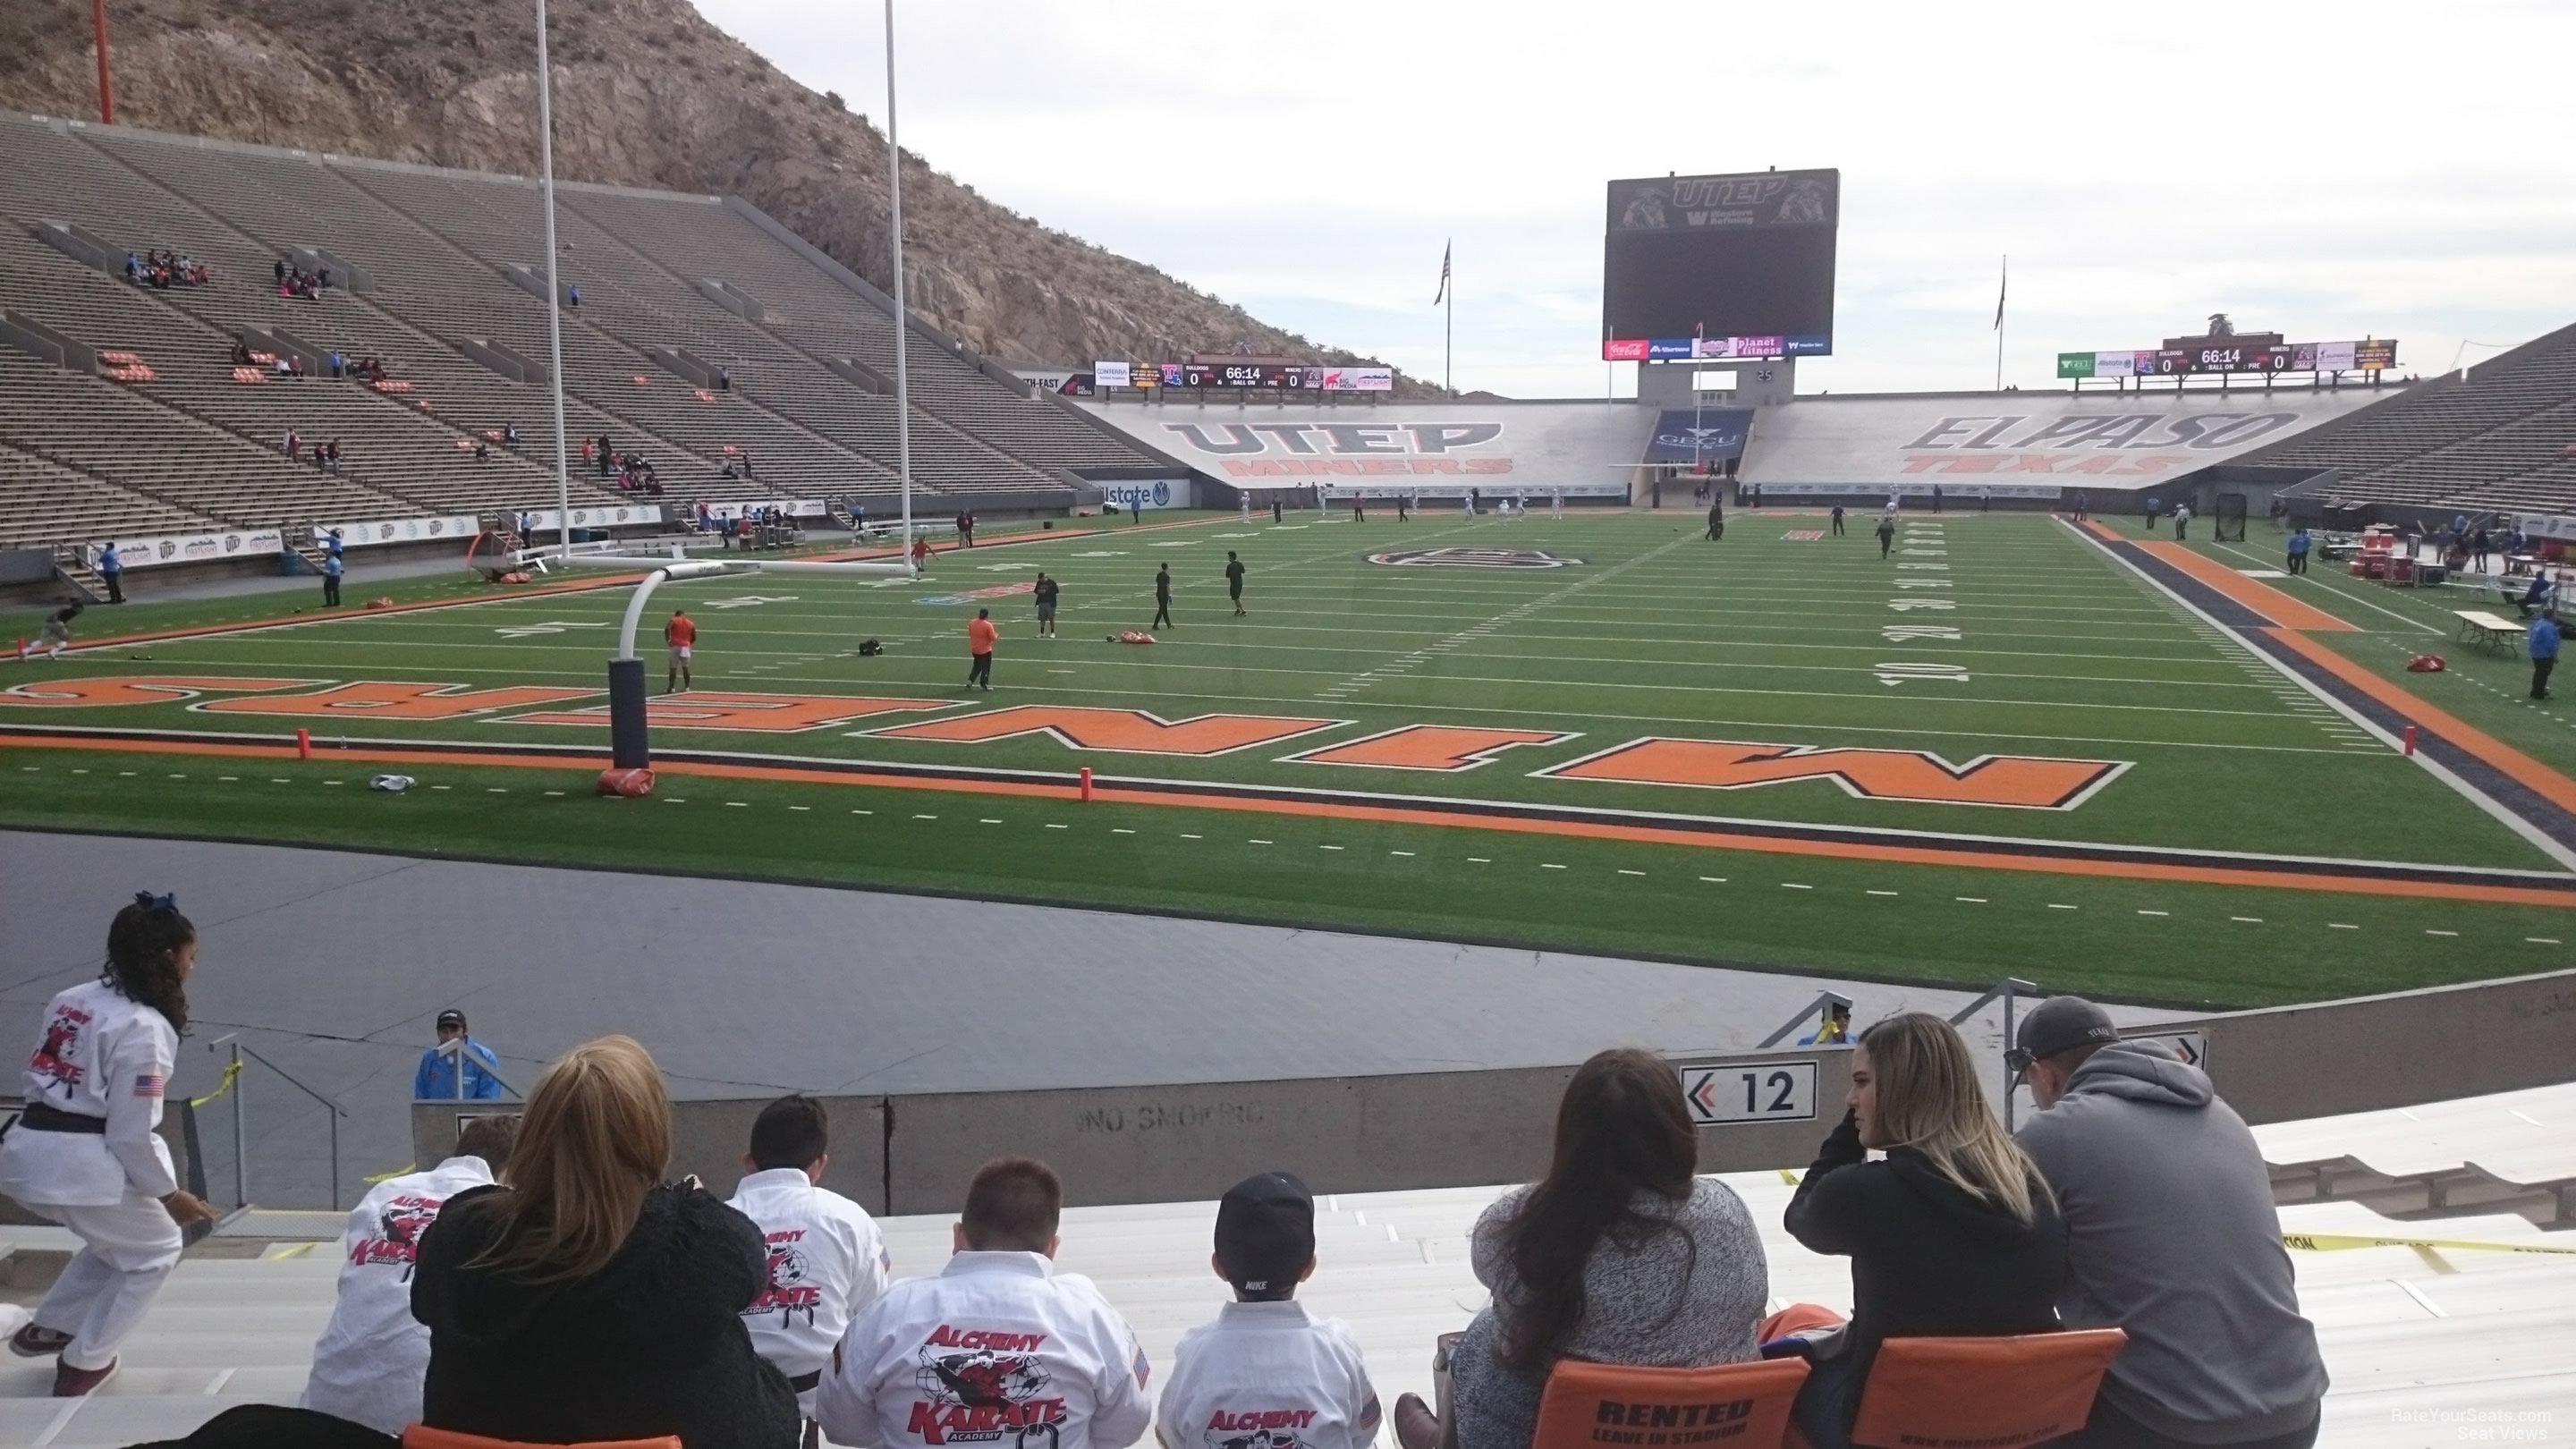 section 12, row 15 seat view  for football - sun bowl